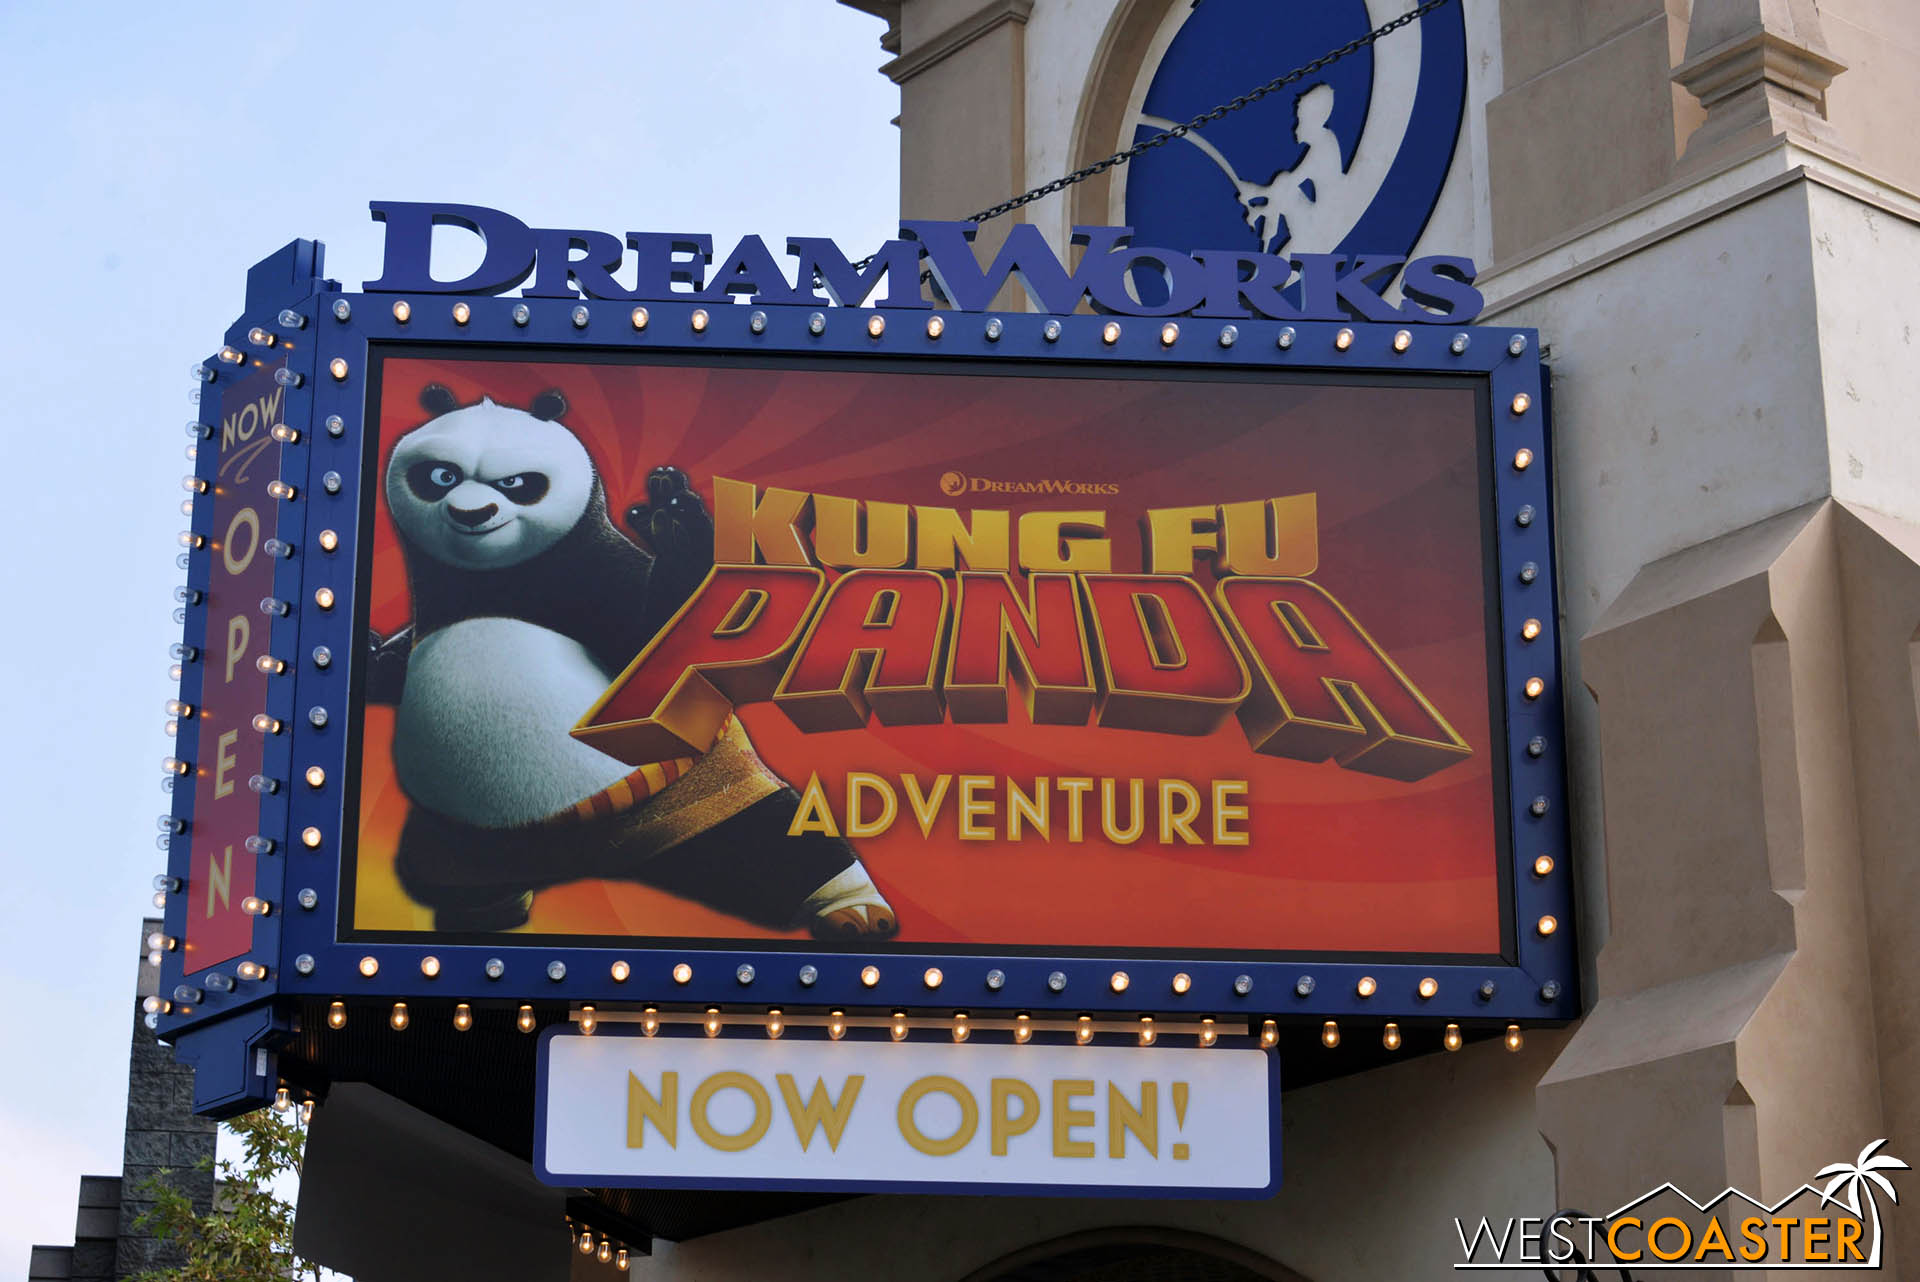  The theater was inaugurated this past June with Kung Fu Panda: The Emperor’s Quest. 